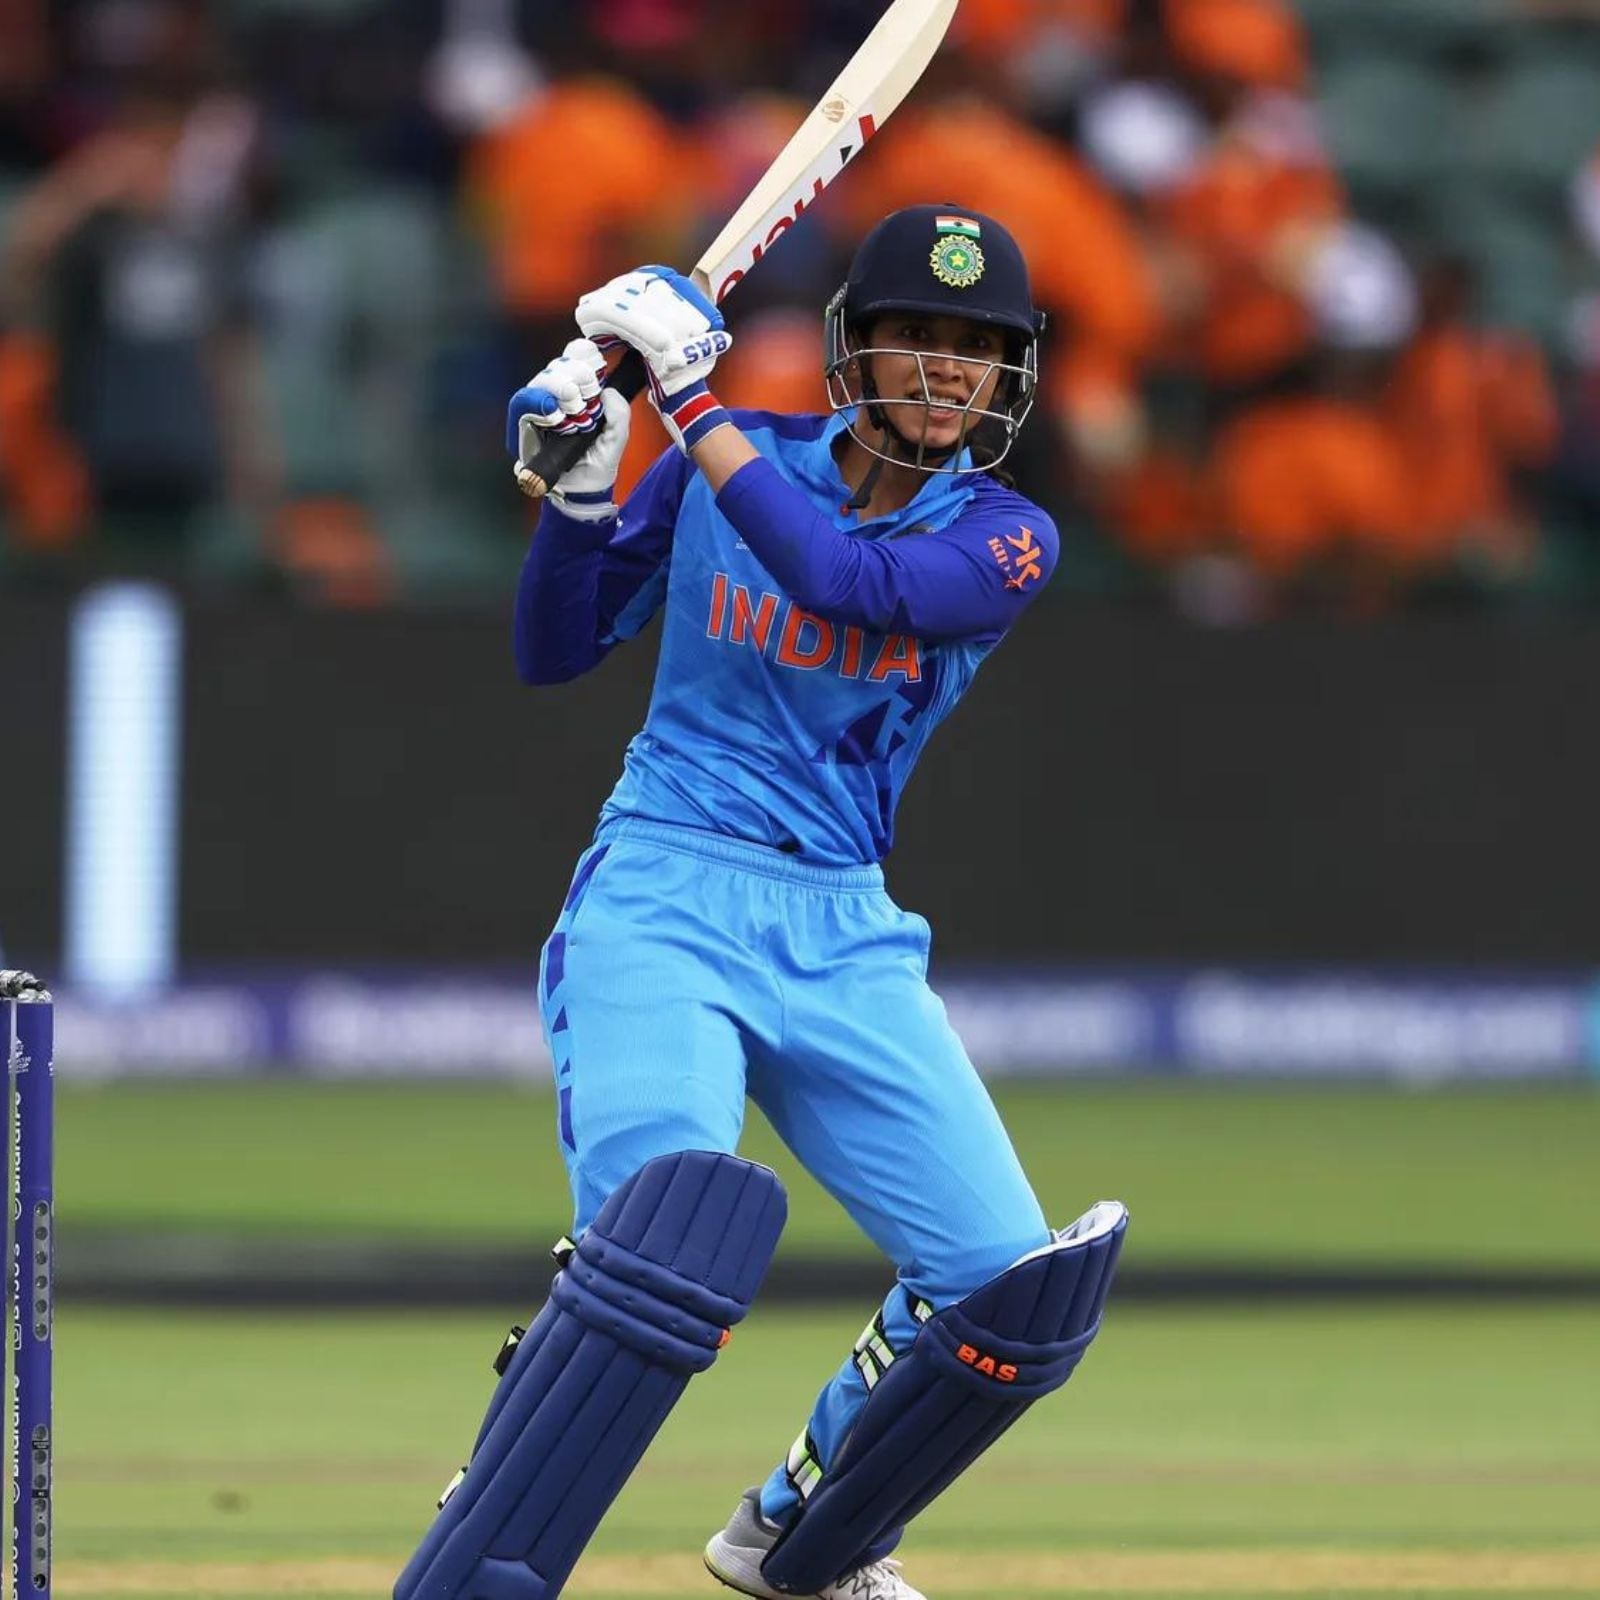 Womens T20 World Cup, India Women vs Ireland Women Live Streaming When and Where to Watch Live Coverage on TV, Online